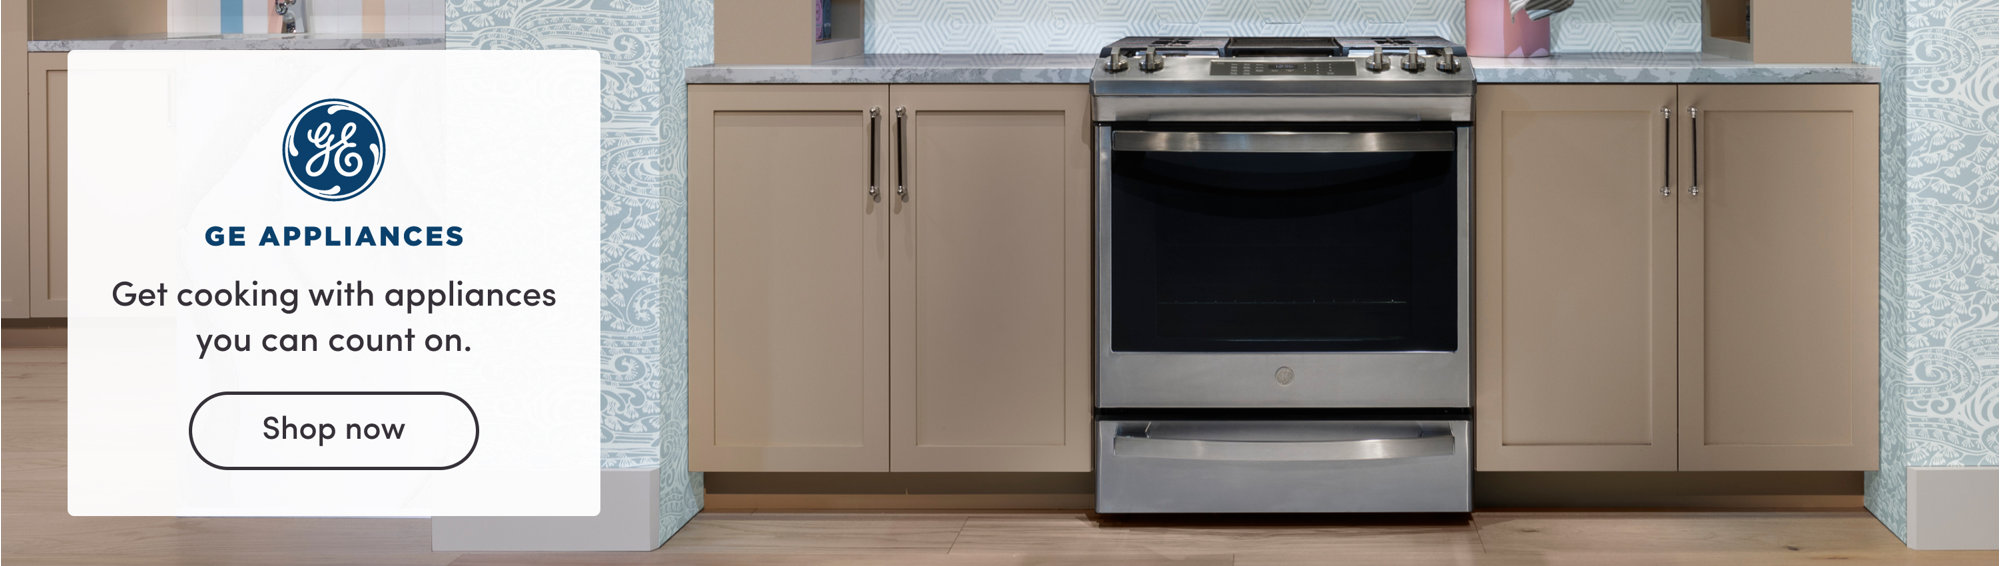 GE Appliances. Get cooking with appliances you can count on. Shop now